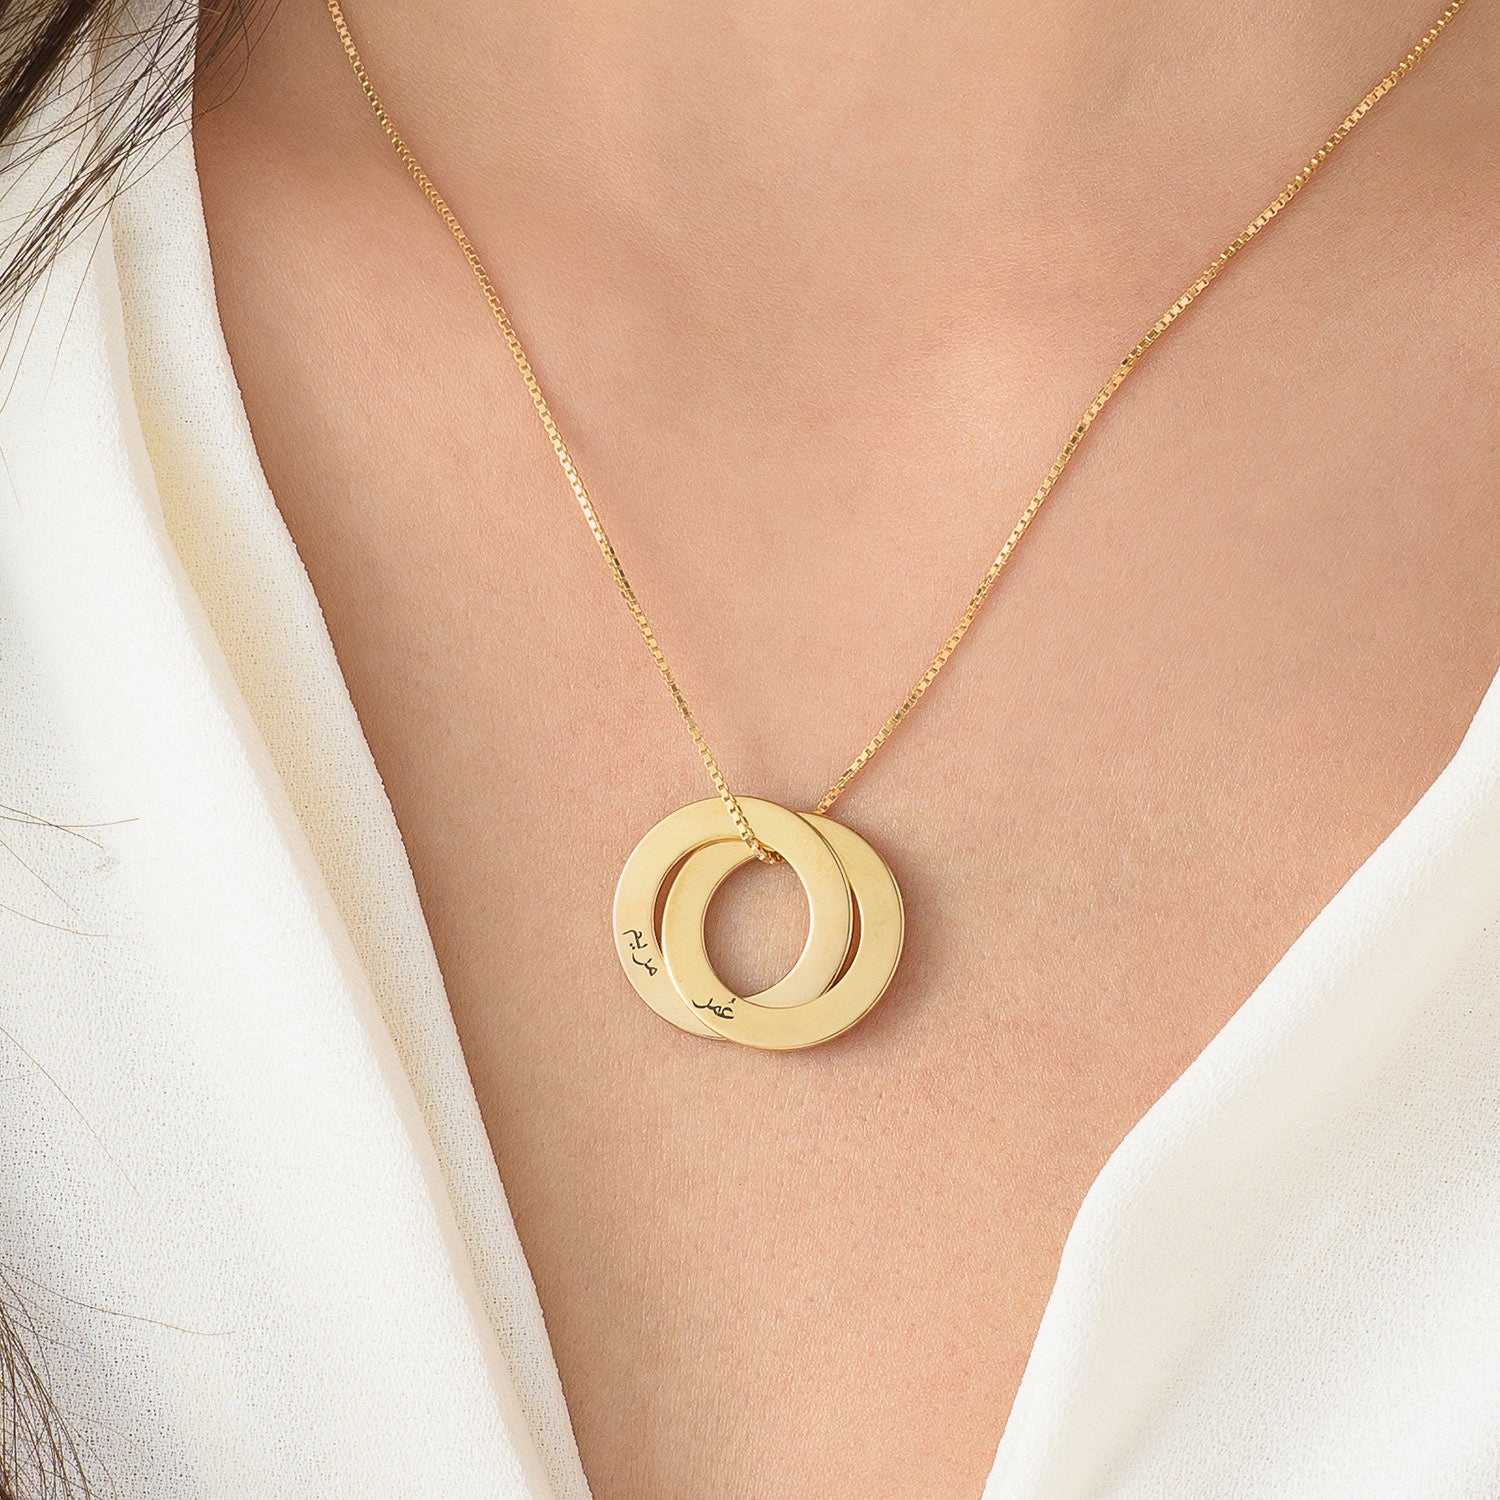 Russian ring necklace with two rings in gold plating